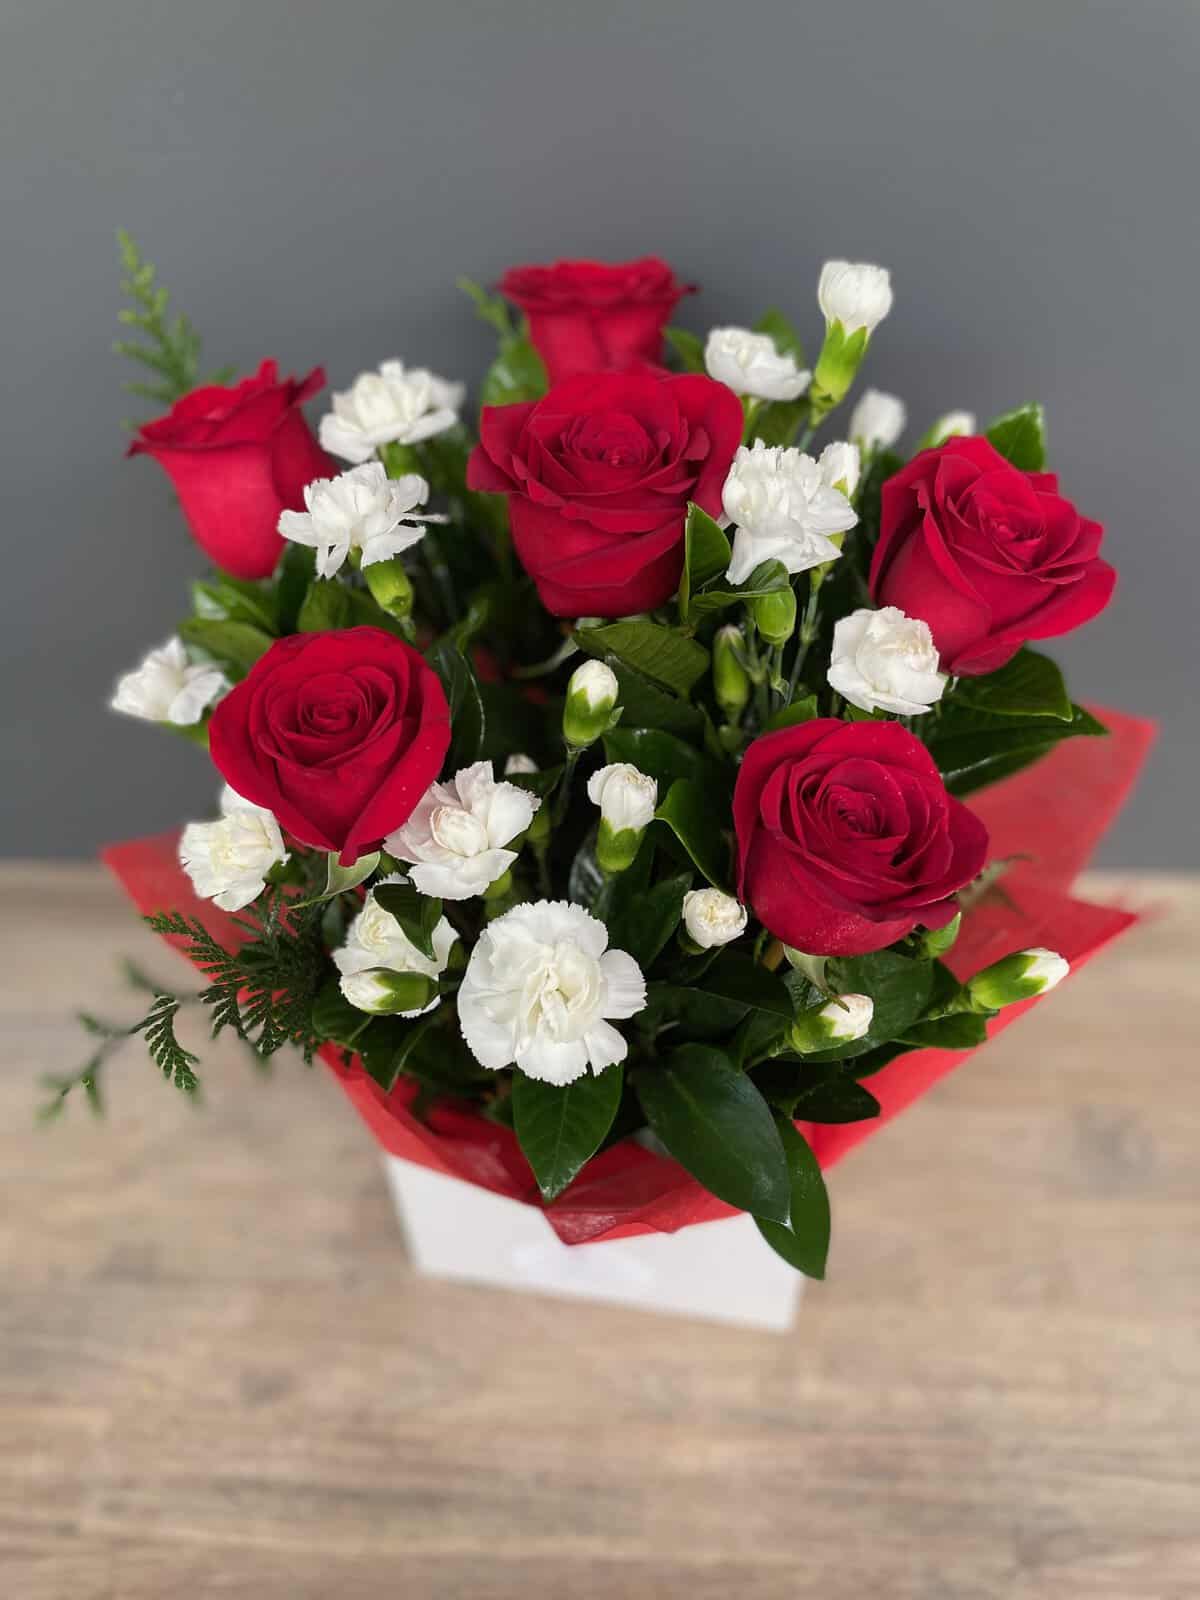 Red long stemmed roses with white carnations presented in a box